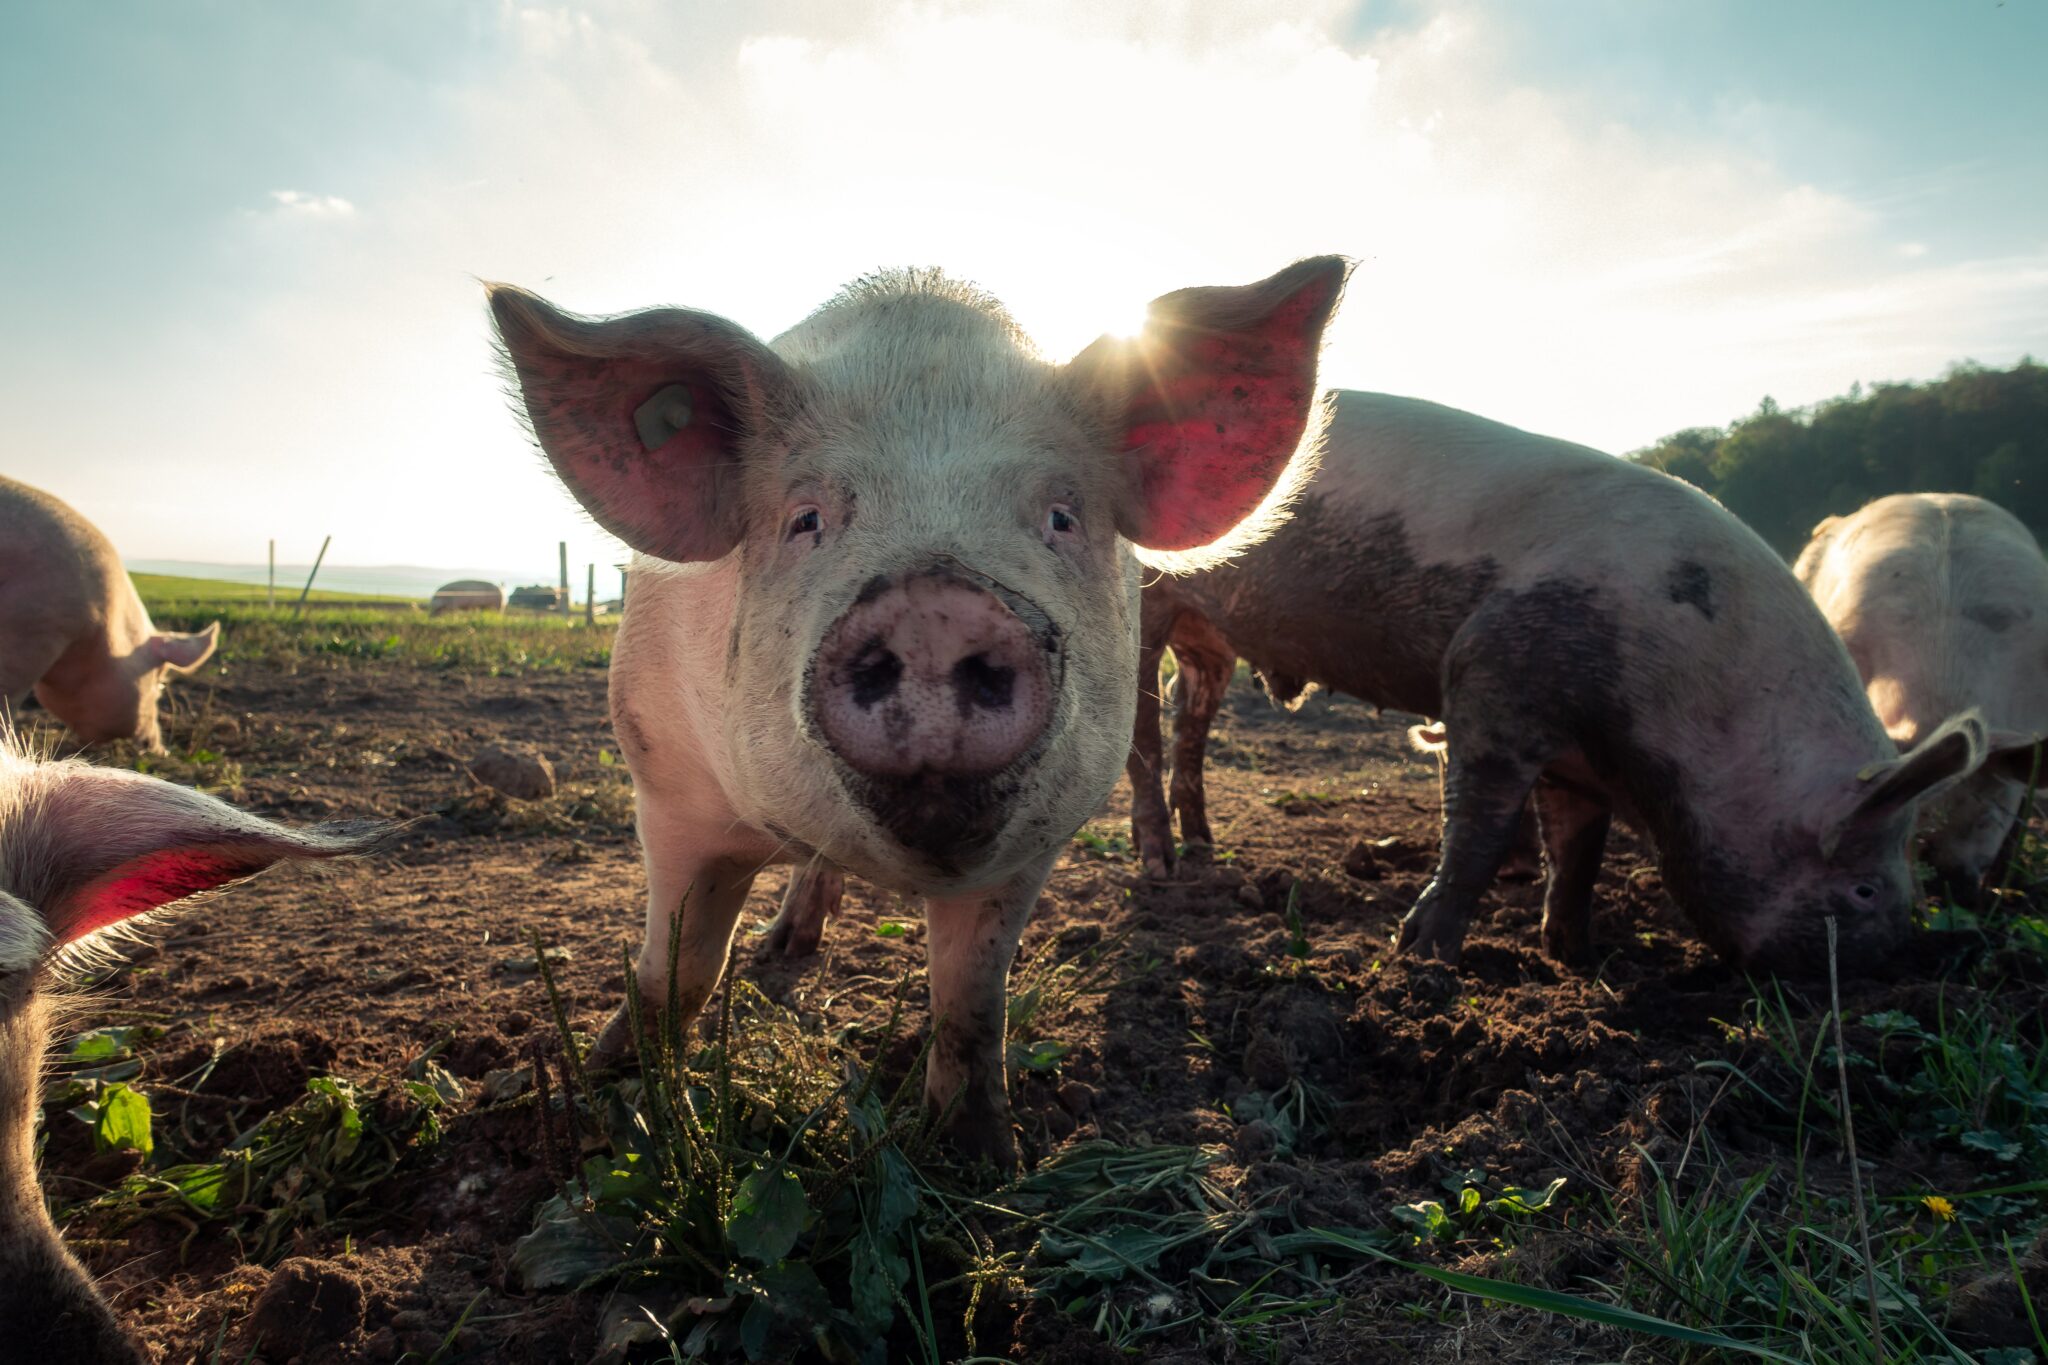 African Swine Fever has led to hundreds of millions of deaths and cullings, and threatens the socioeconomic security of farmers around the world.